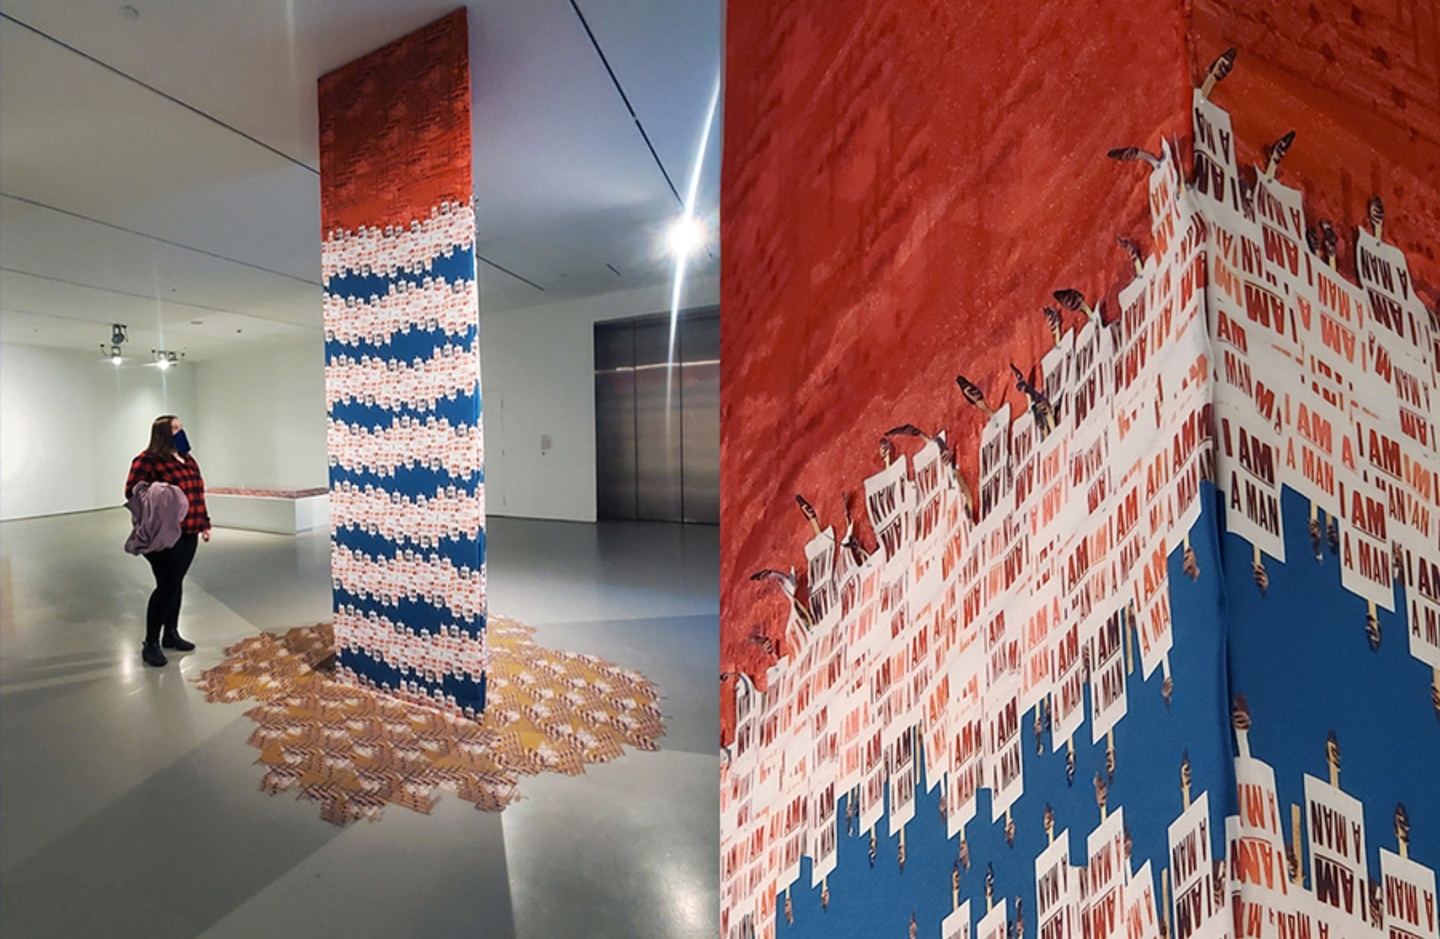 Side-by-side image, showing a person viewing a tapestry hanging from the ceiling, and then a detail view of the tapestry, which is red on top, with a woven strip white pattern flowing into a blue row, then back to the white strip pattern.